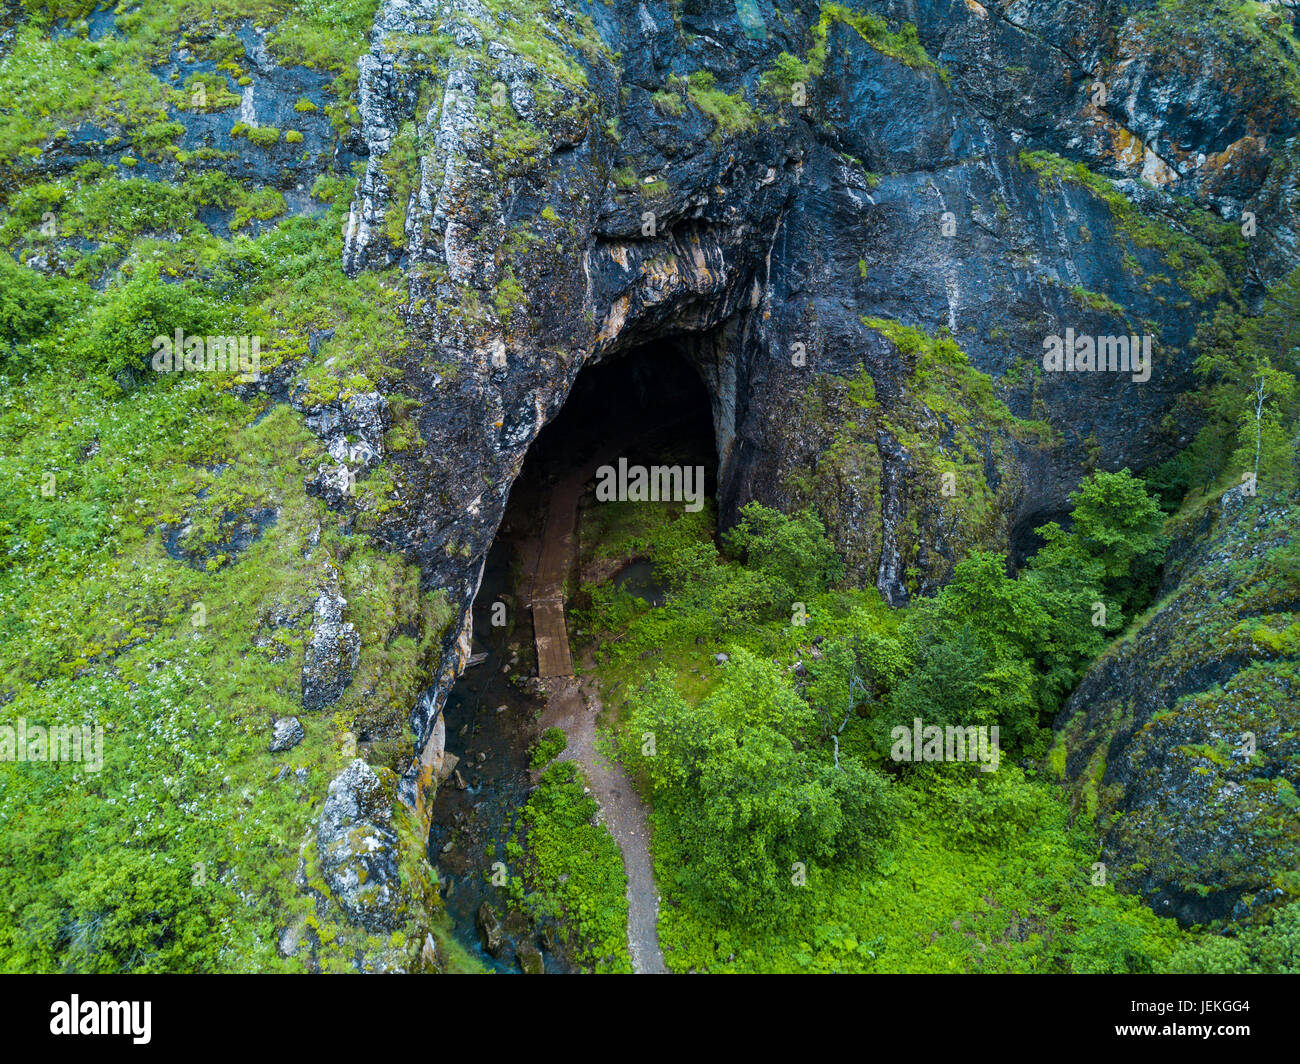 Russia Bashkortostan High Resolution Stock Photography and Images - Alamy